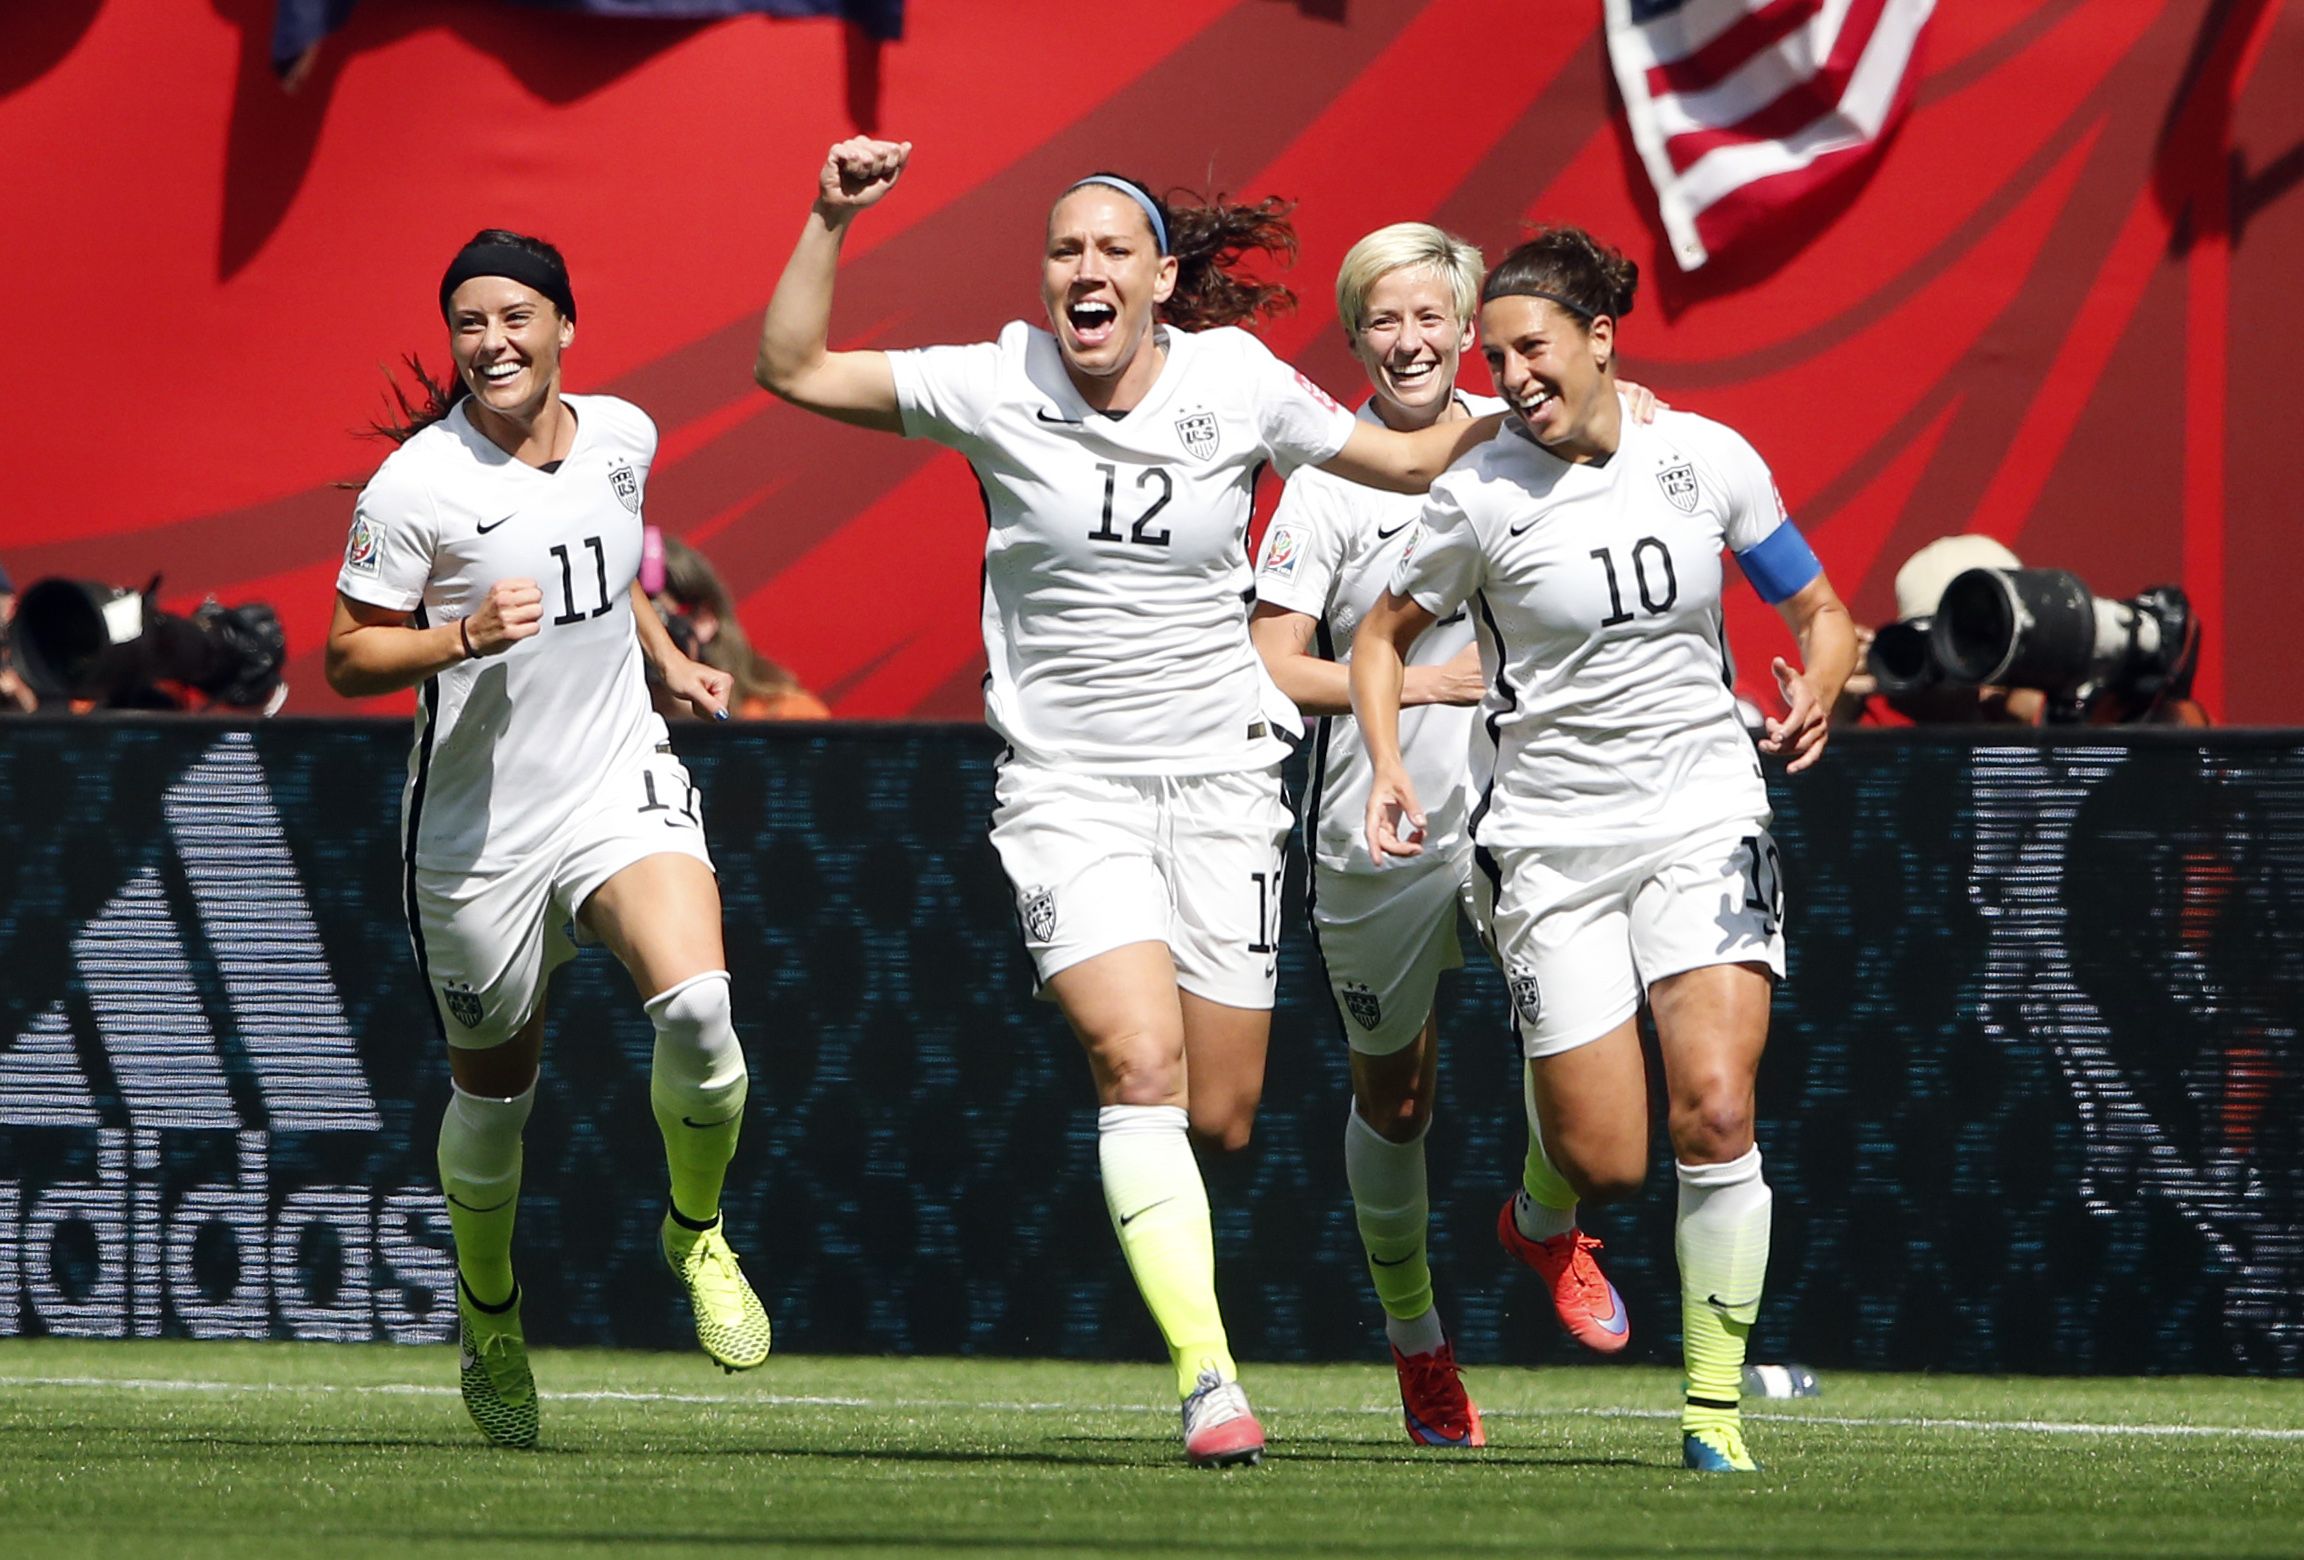 NYC Ticker Tape Parade Confirmed for Women's World Cup Champions